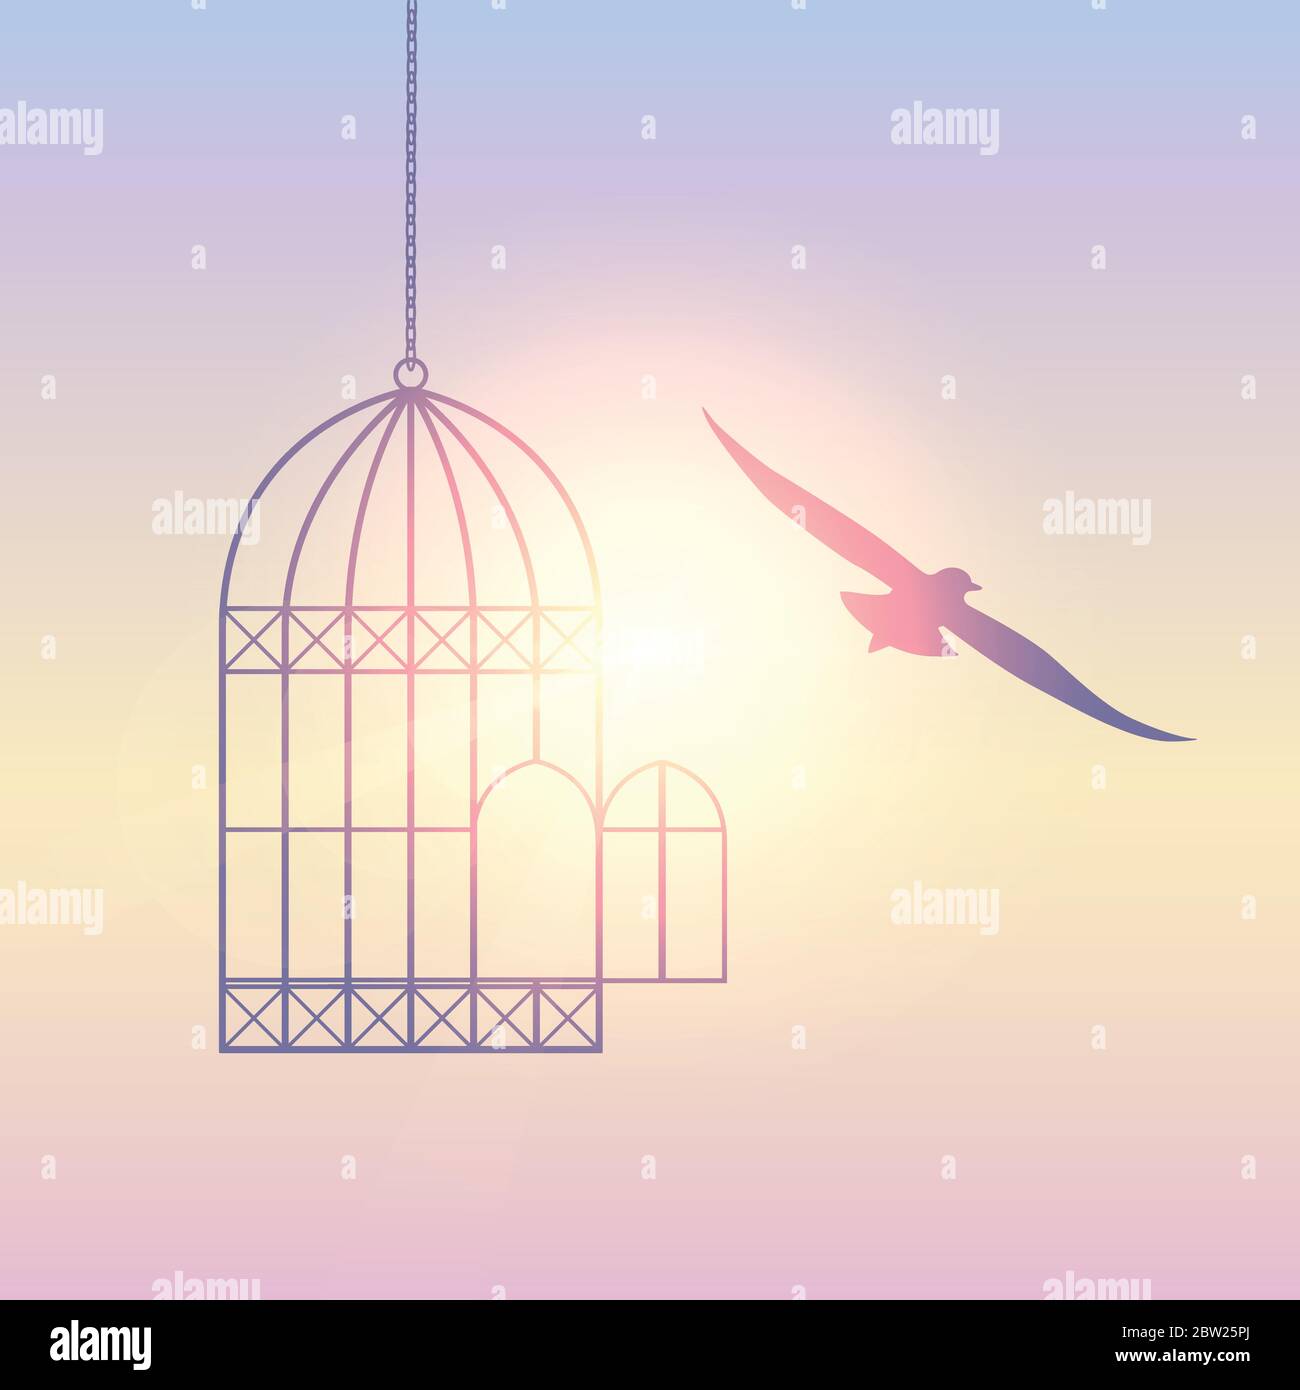 bird flies out of the cage into the sunny sky vector illustration EPS10 Stock Vector